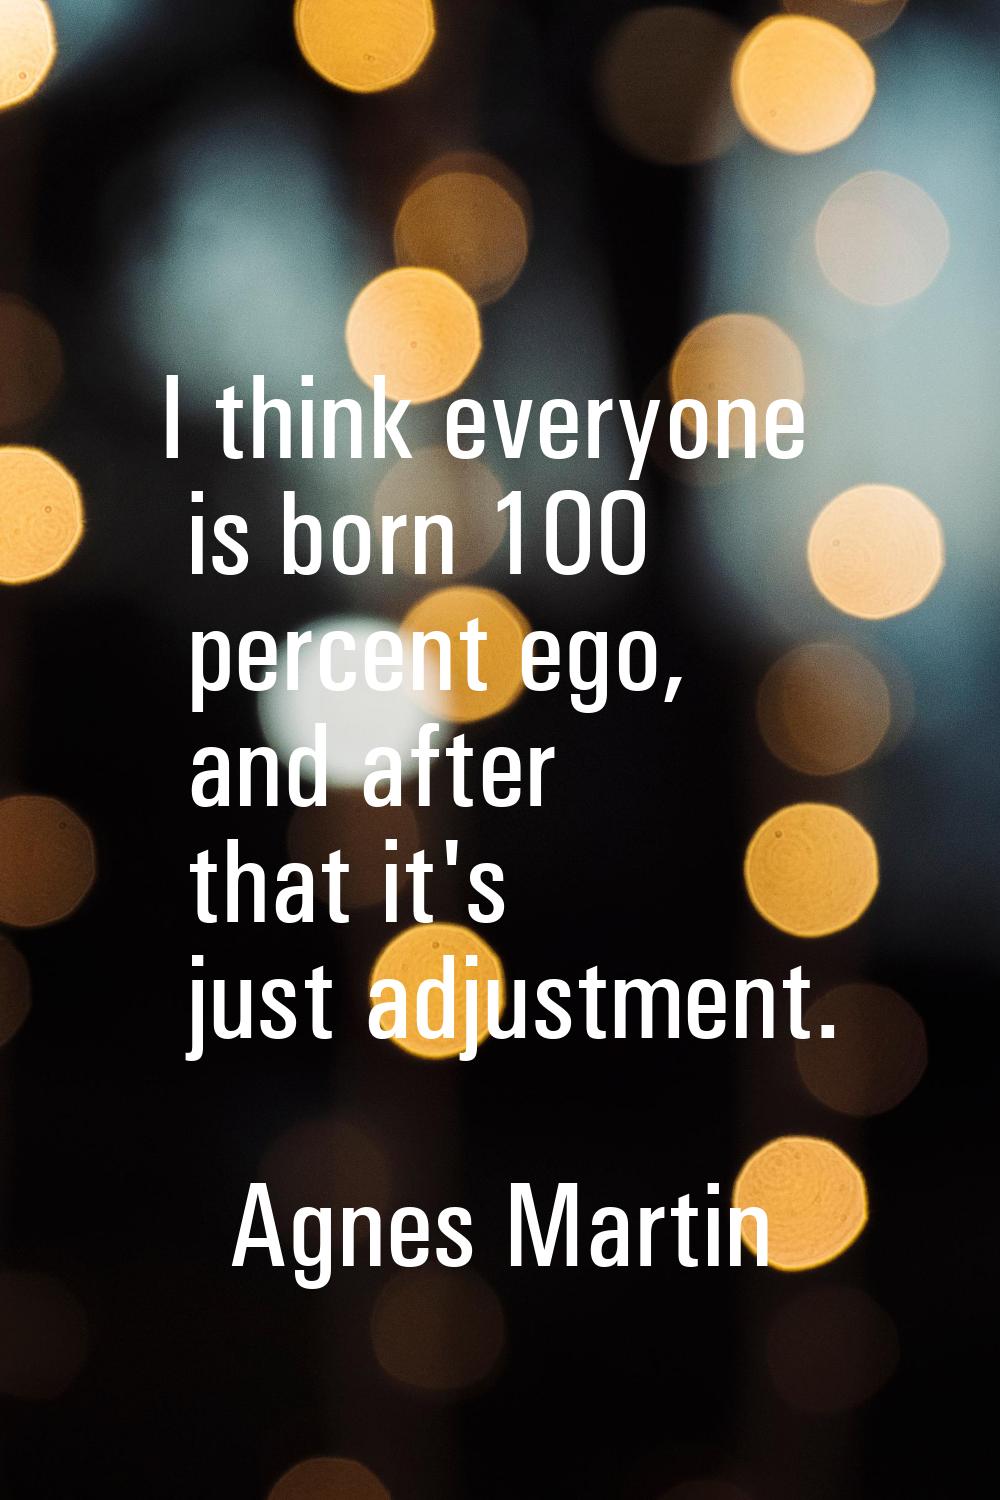 I think everyone is born 100 percent ego, and after that it's just adjustment.